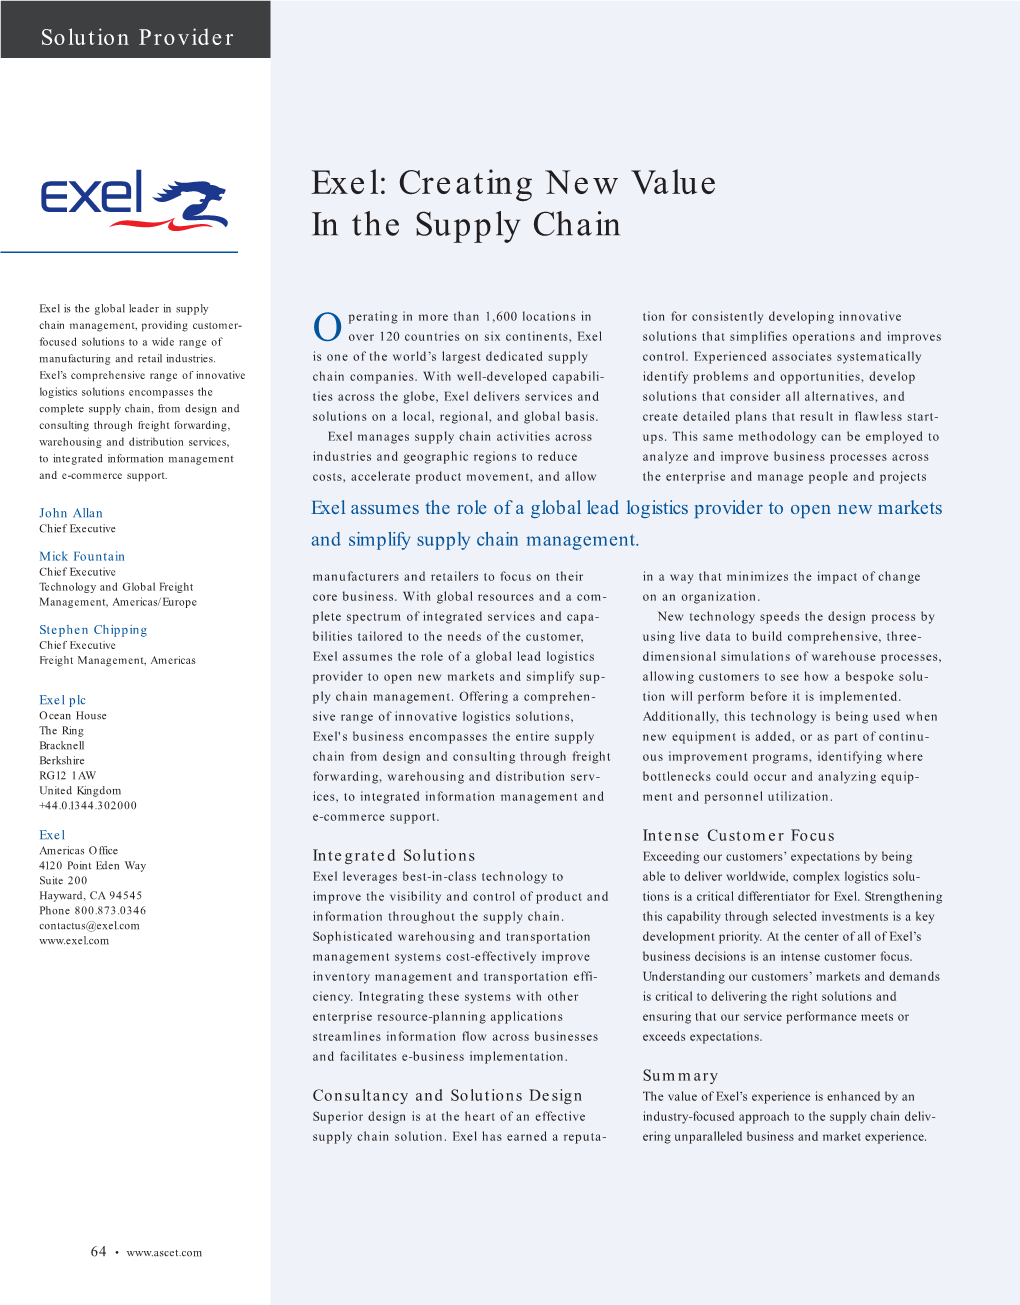 Exel: Creating New Value in the Supply Chain